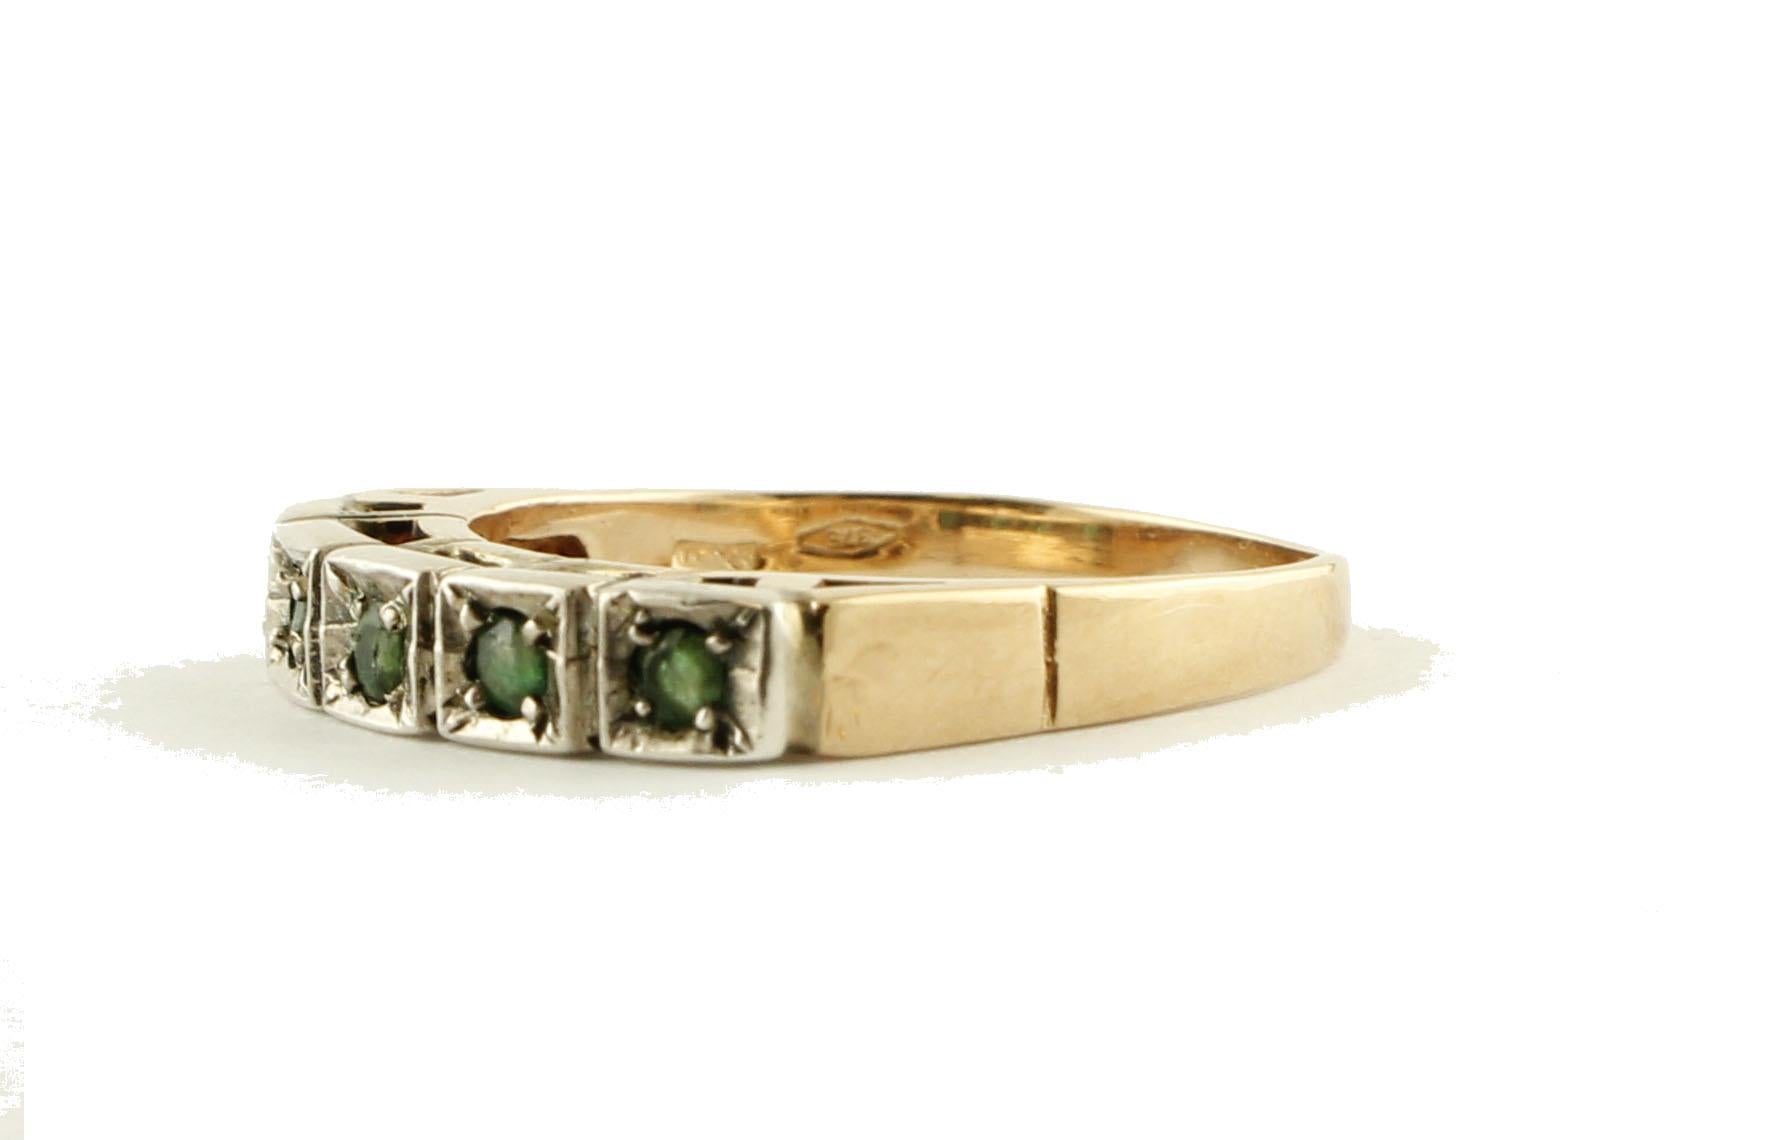 Fabulous band ring in 9K rose gold and silver mounted with 5 deep color little emeralds.
Emeralds 0.28 ct 
Total Weight 2.80 g 
R.F + ueg
Italian size 14
French size 54
Usa size 6.84

We hereby inform our customers that in the case of return they